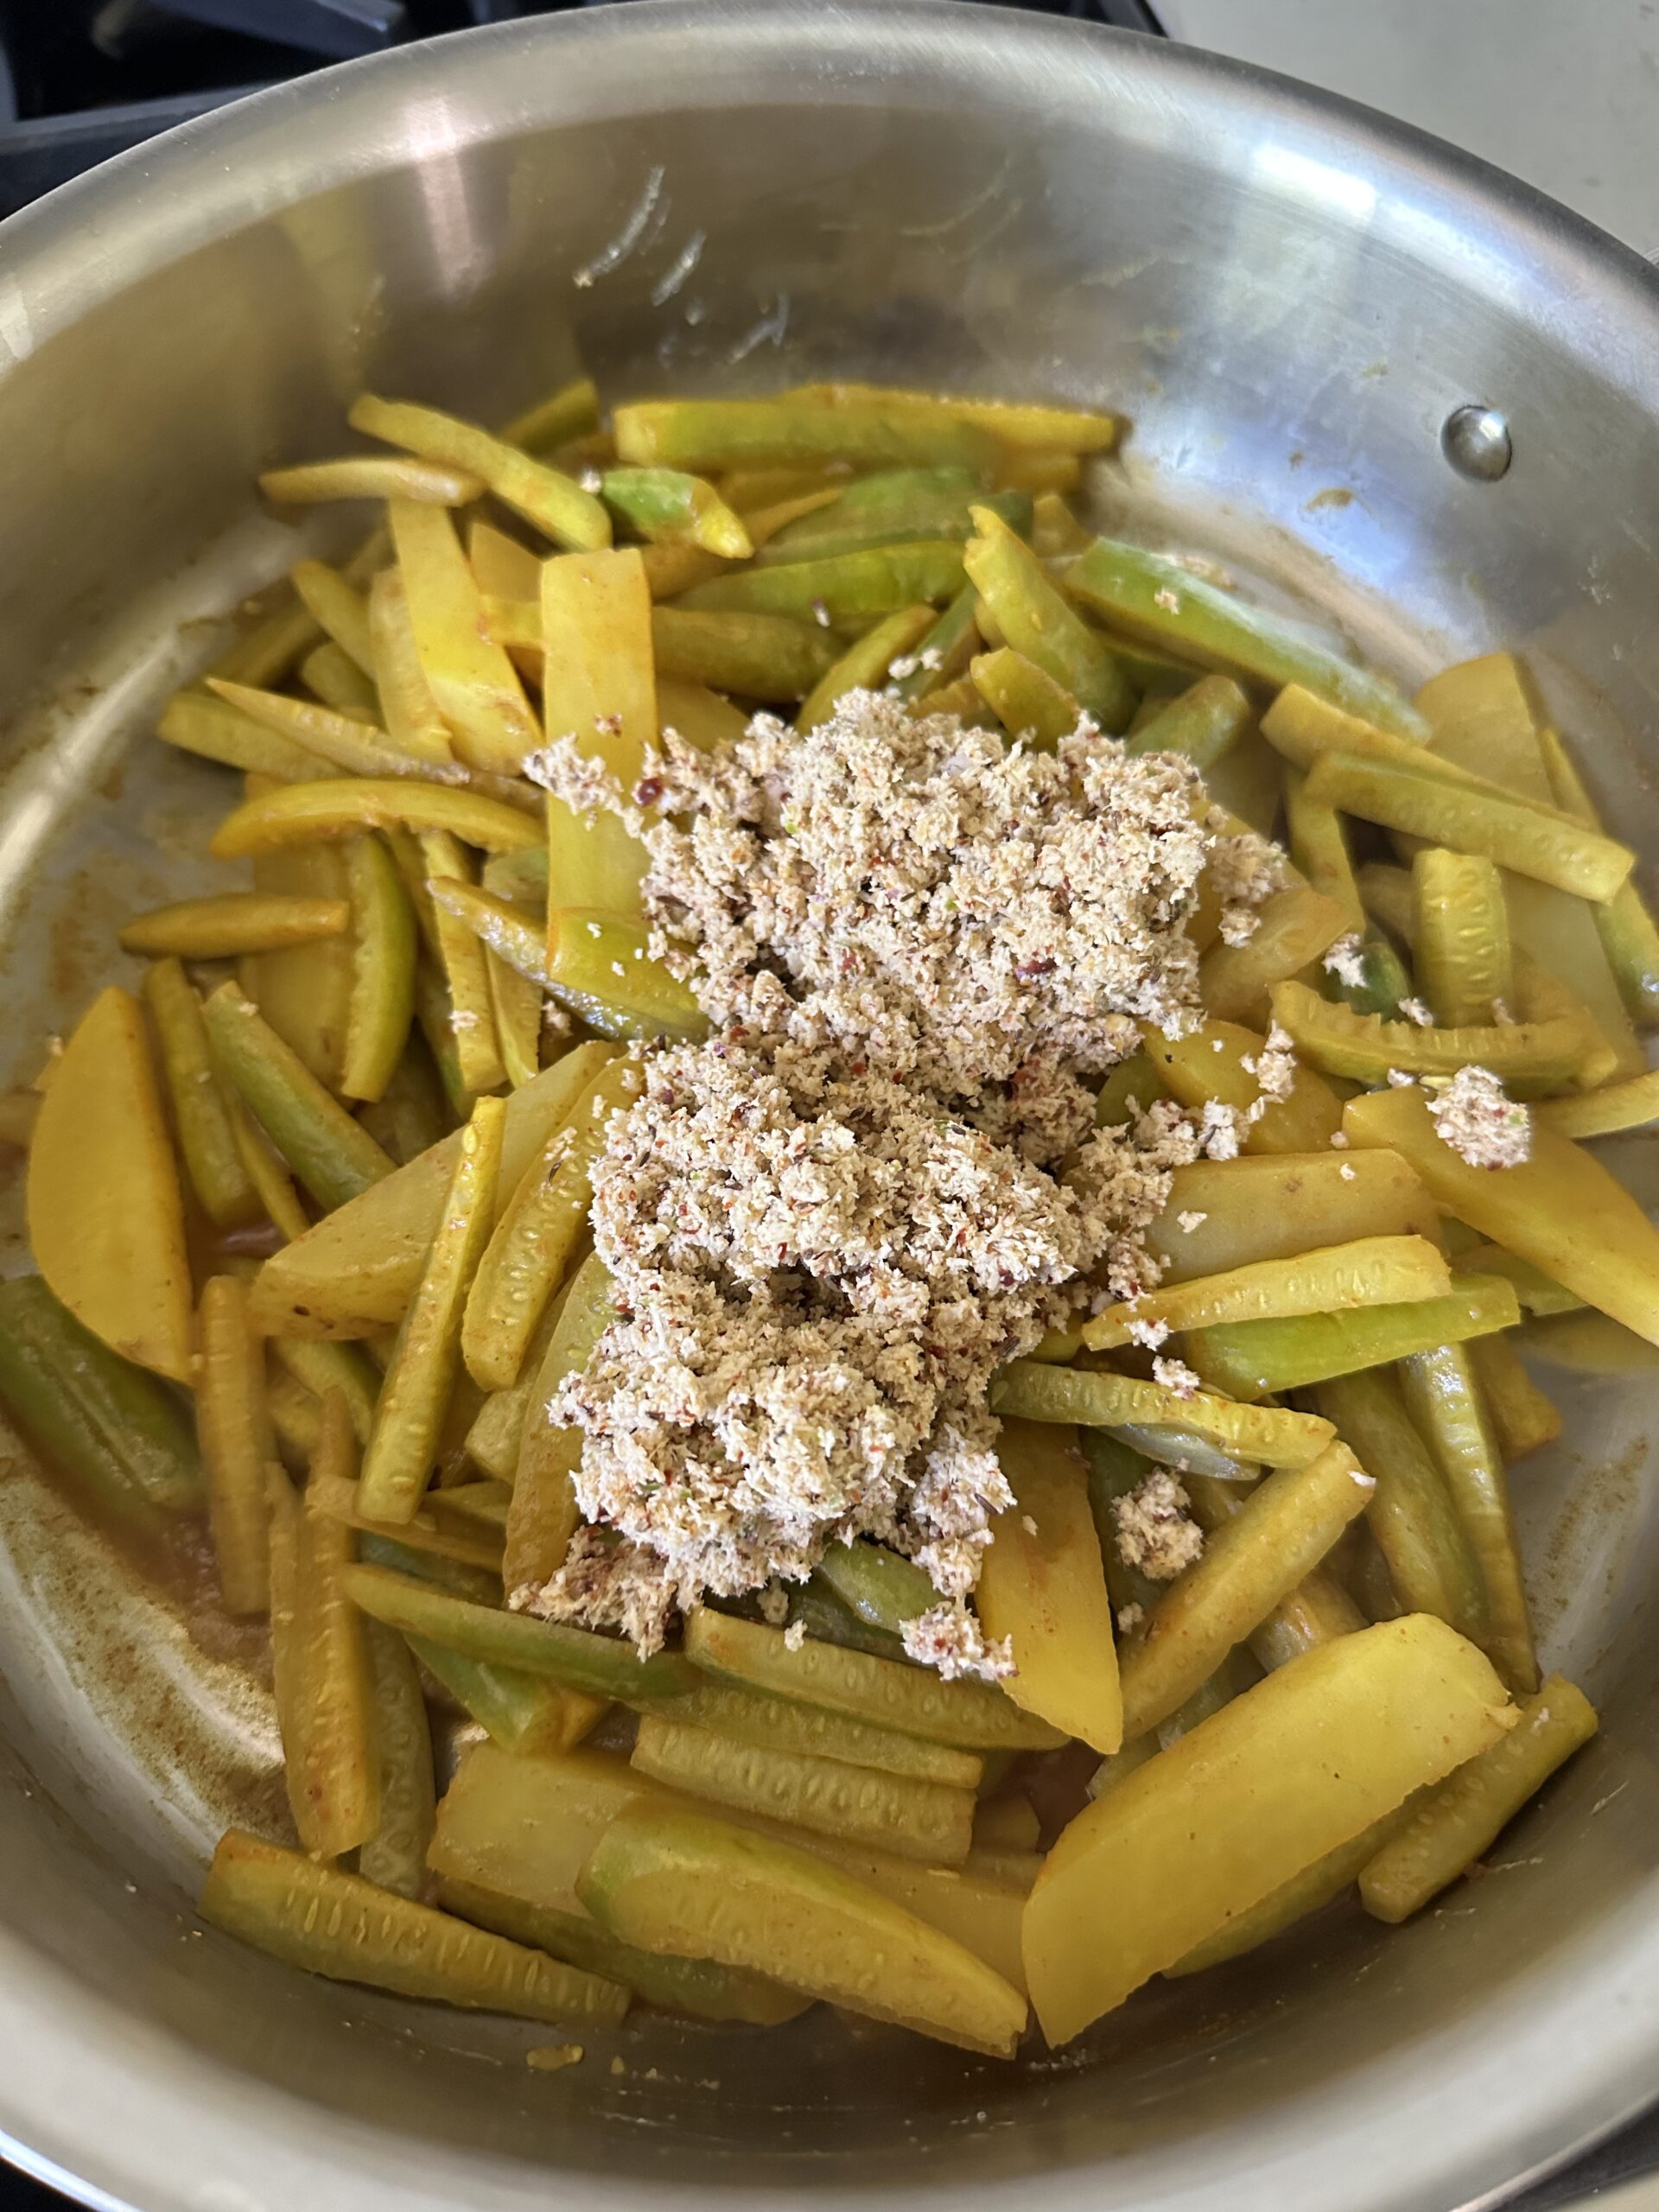 ground coconut with spices added to the cooked veggies in the pan